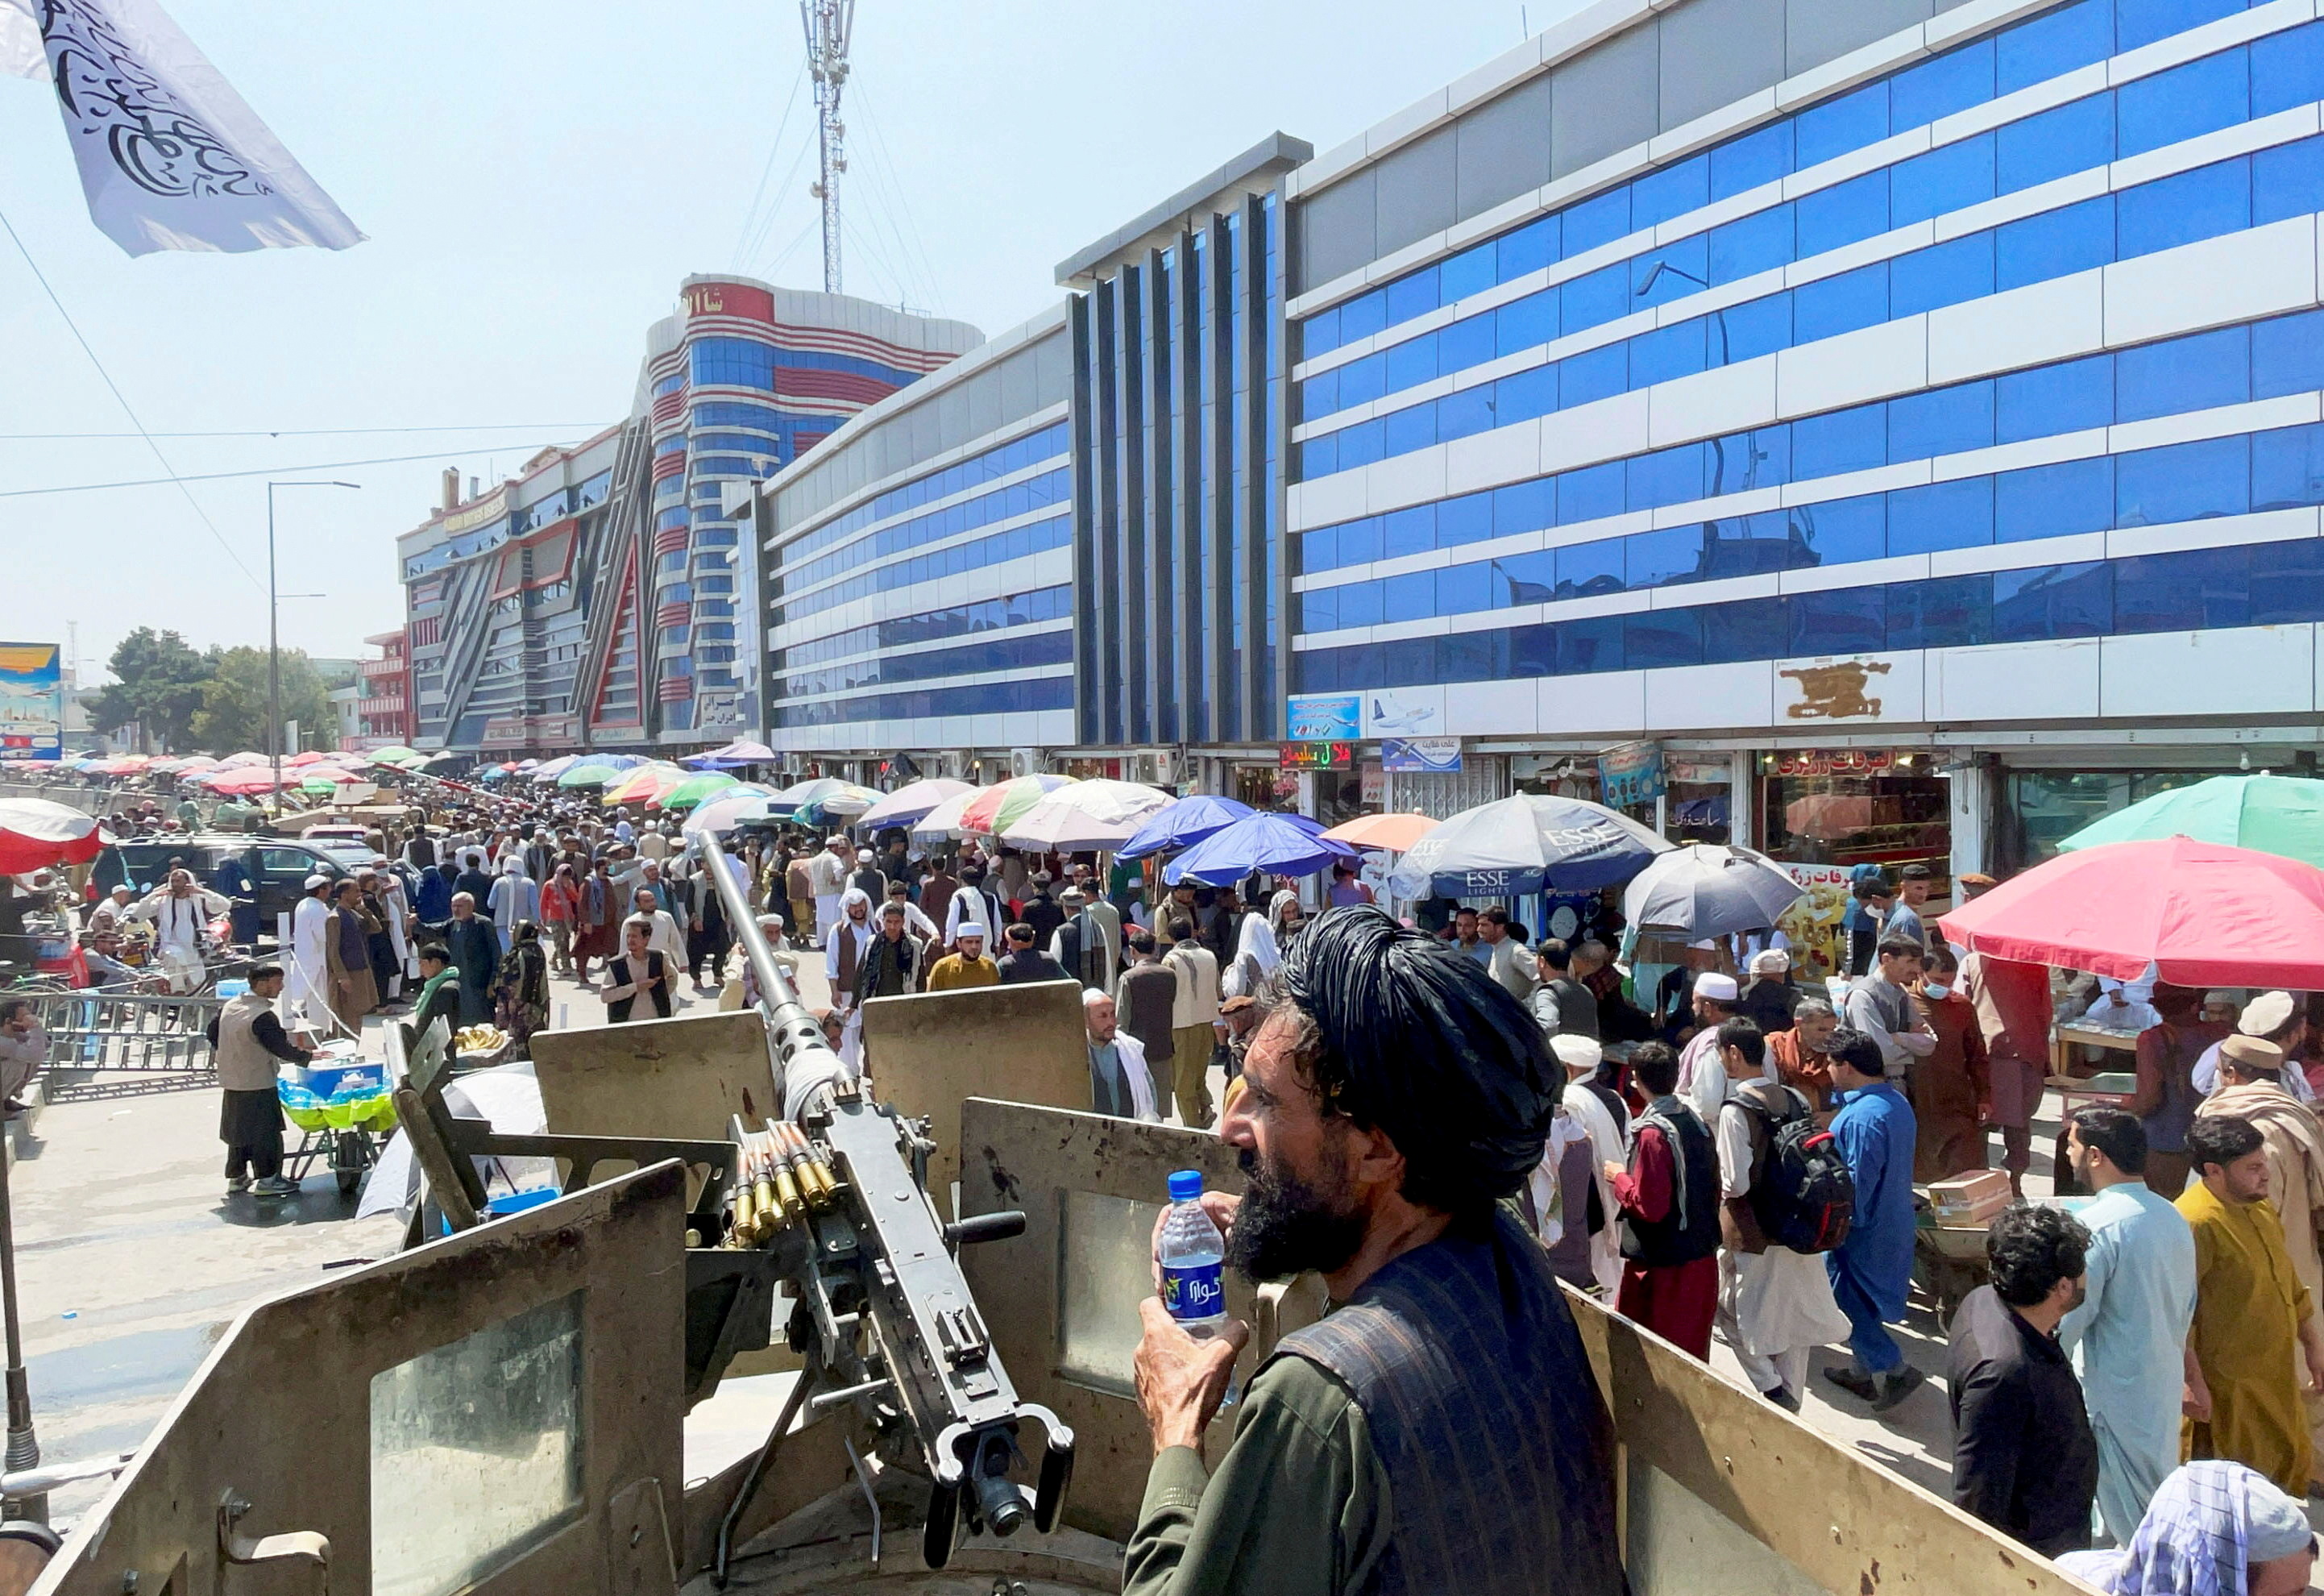 Taliban security forces stand guard among crowds of people in front of money exchange market in Kabul